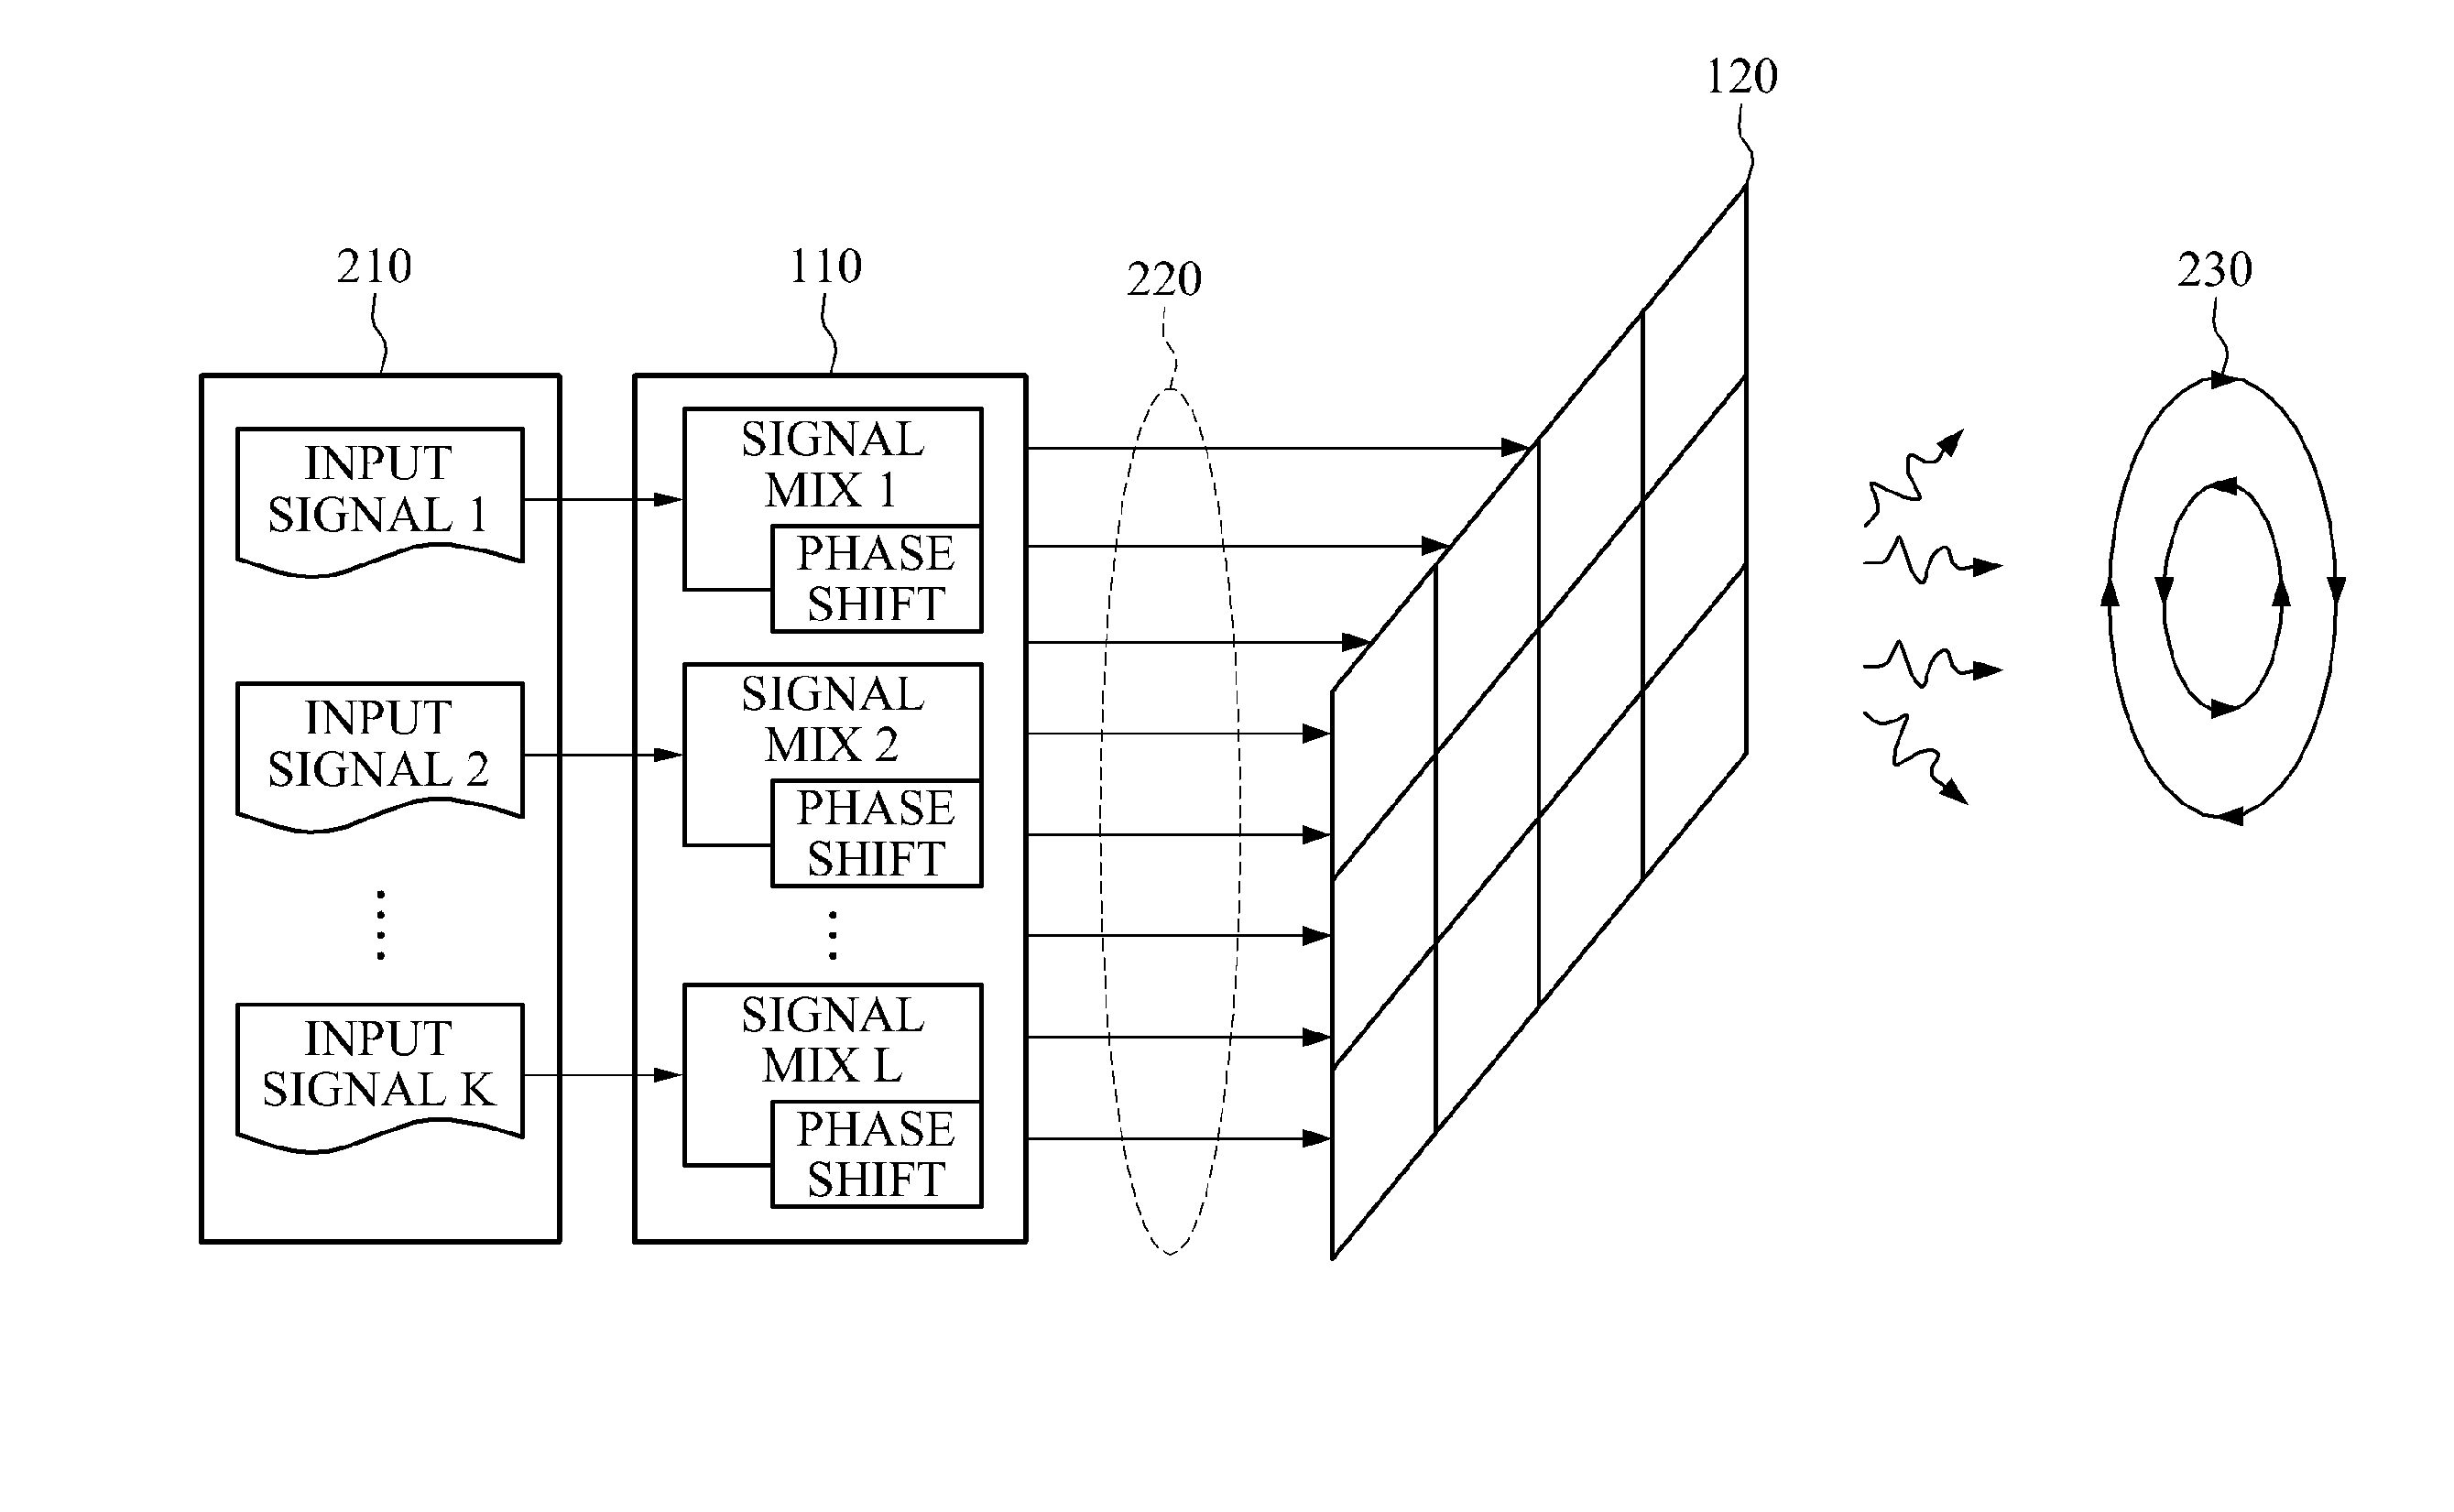 Apparatus and method for simultaneously transmitting and receiving orbital angular momentum (OAM) modes